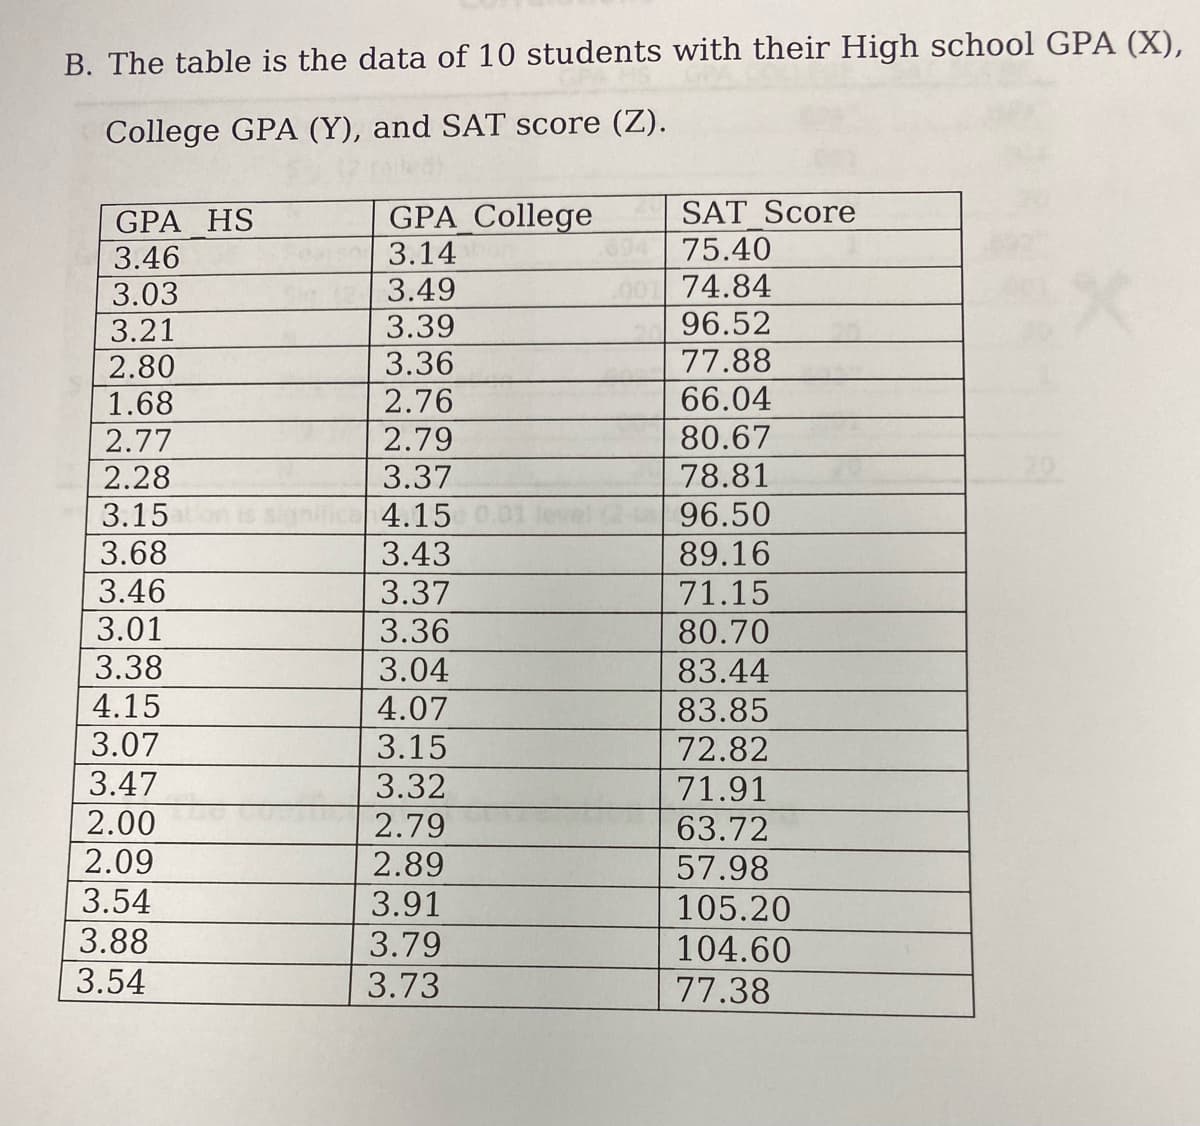 B. The table is the data of 10 students with their High school GPA (X),
College GPA (Y), and SAT score (Z).
SAT Score
GPA HS
3.46
GPA College
3.14
75.40
0074.84
96.52
3.49
3.03
3.21
2.80
1.68
3.39
3.36
77.88
2.76
66.04
80.67
2.77
2.28
2.79
3.37
78.81
3.15
4.15
96.50
3.68
3.46
3.43
3.37
3.36
89.16
71.15
80.70
3.01
3.38
3.04
83.44
4.15
4.07
83.85
3.07
3.15
3.32
2.79
2.89
72.82
3.47
71.91
2.00
2.09
3.54
3.88
63.72
57.98
105.20
3.91
3.79
104.60
3.54
3.73
77.38
